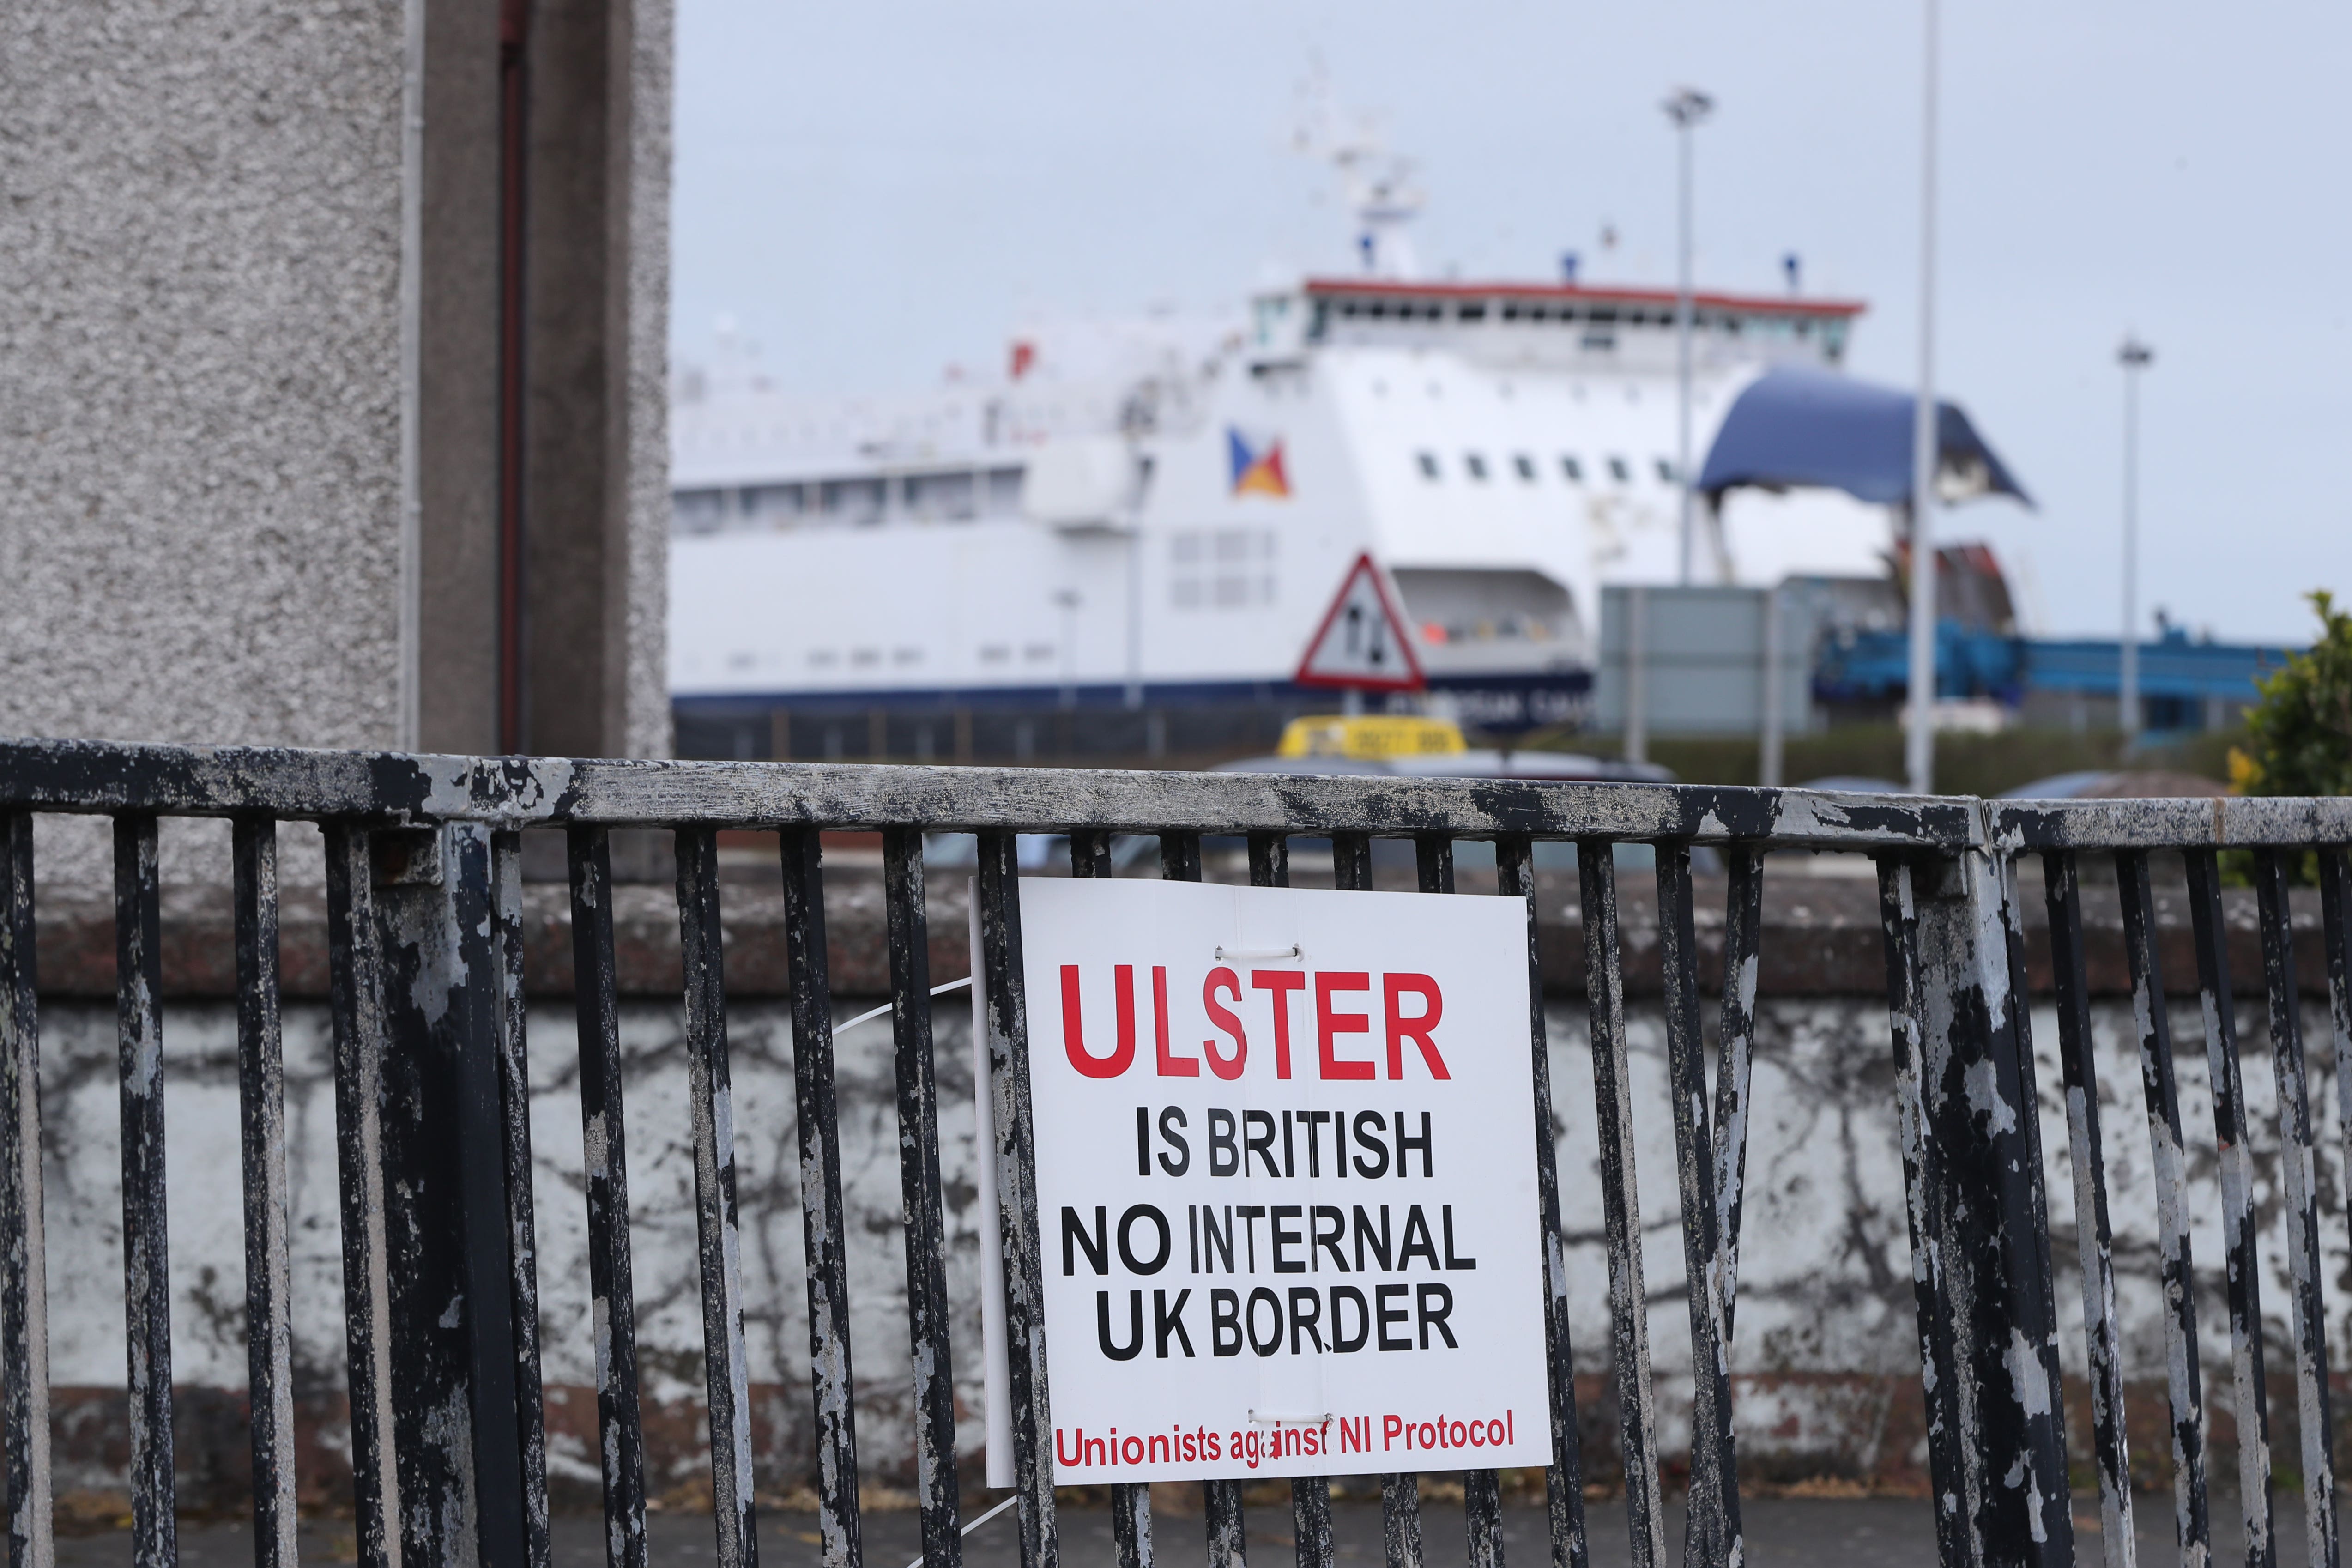 A sign protesting against the Northern Ireland Protocol in Larne Harbour, Northern Ireland (Niall Carson/PA)